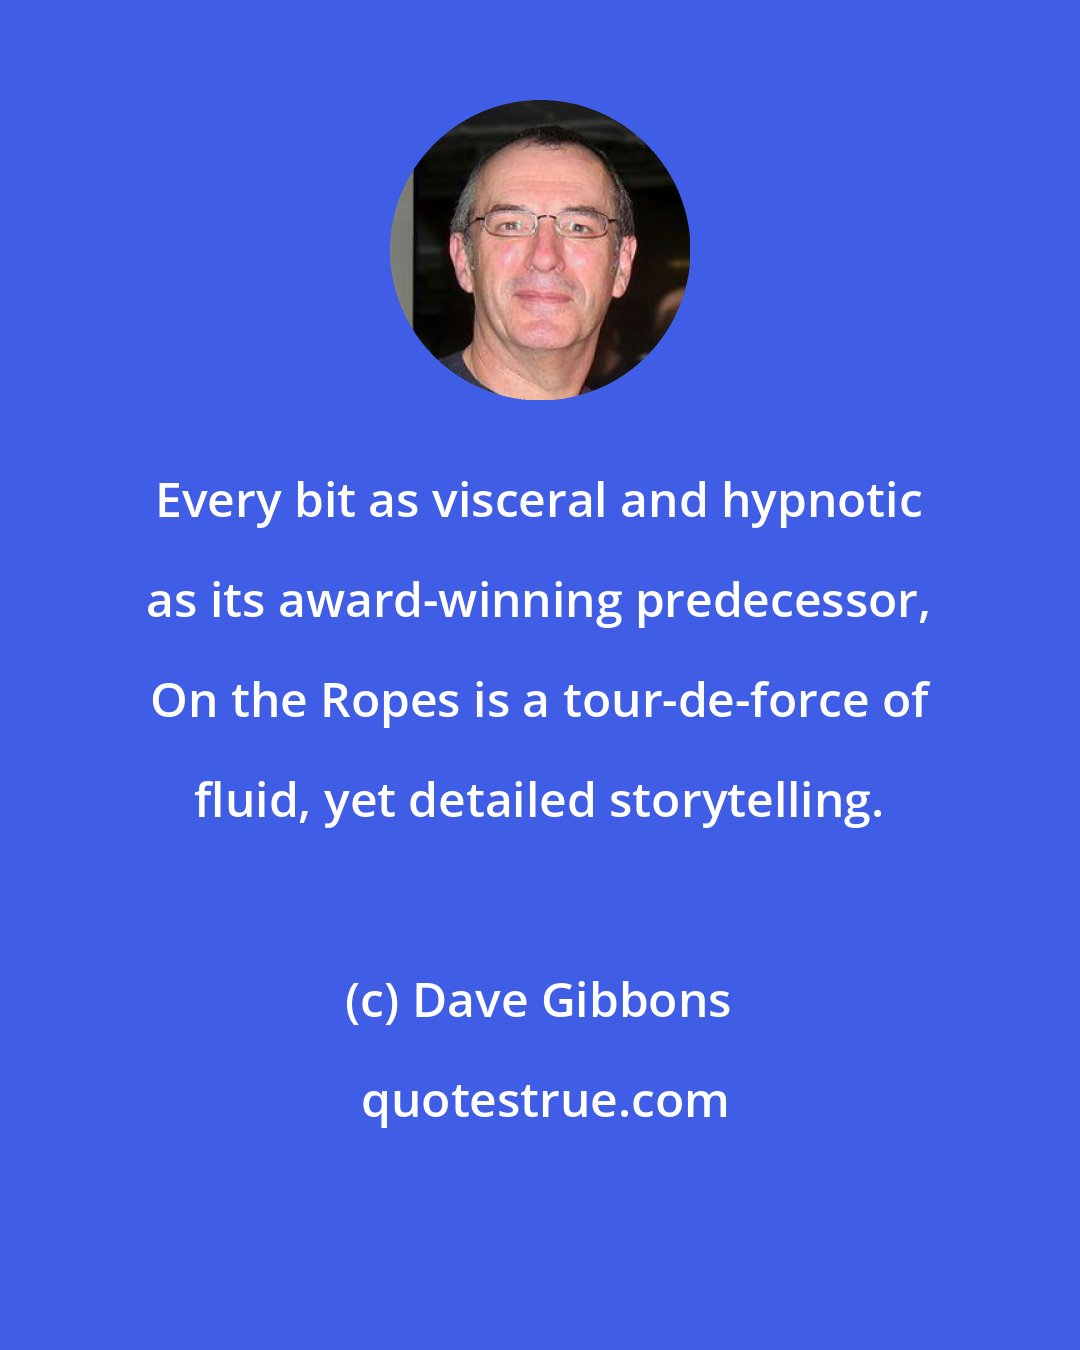 Dave Gibbons: Every bit as visceral and hypnotic as its award-winning predecessor, On the Ropes is a tour-de-force of fluid, yet detailed storytelling.